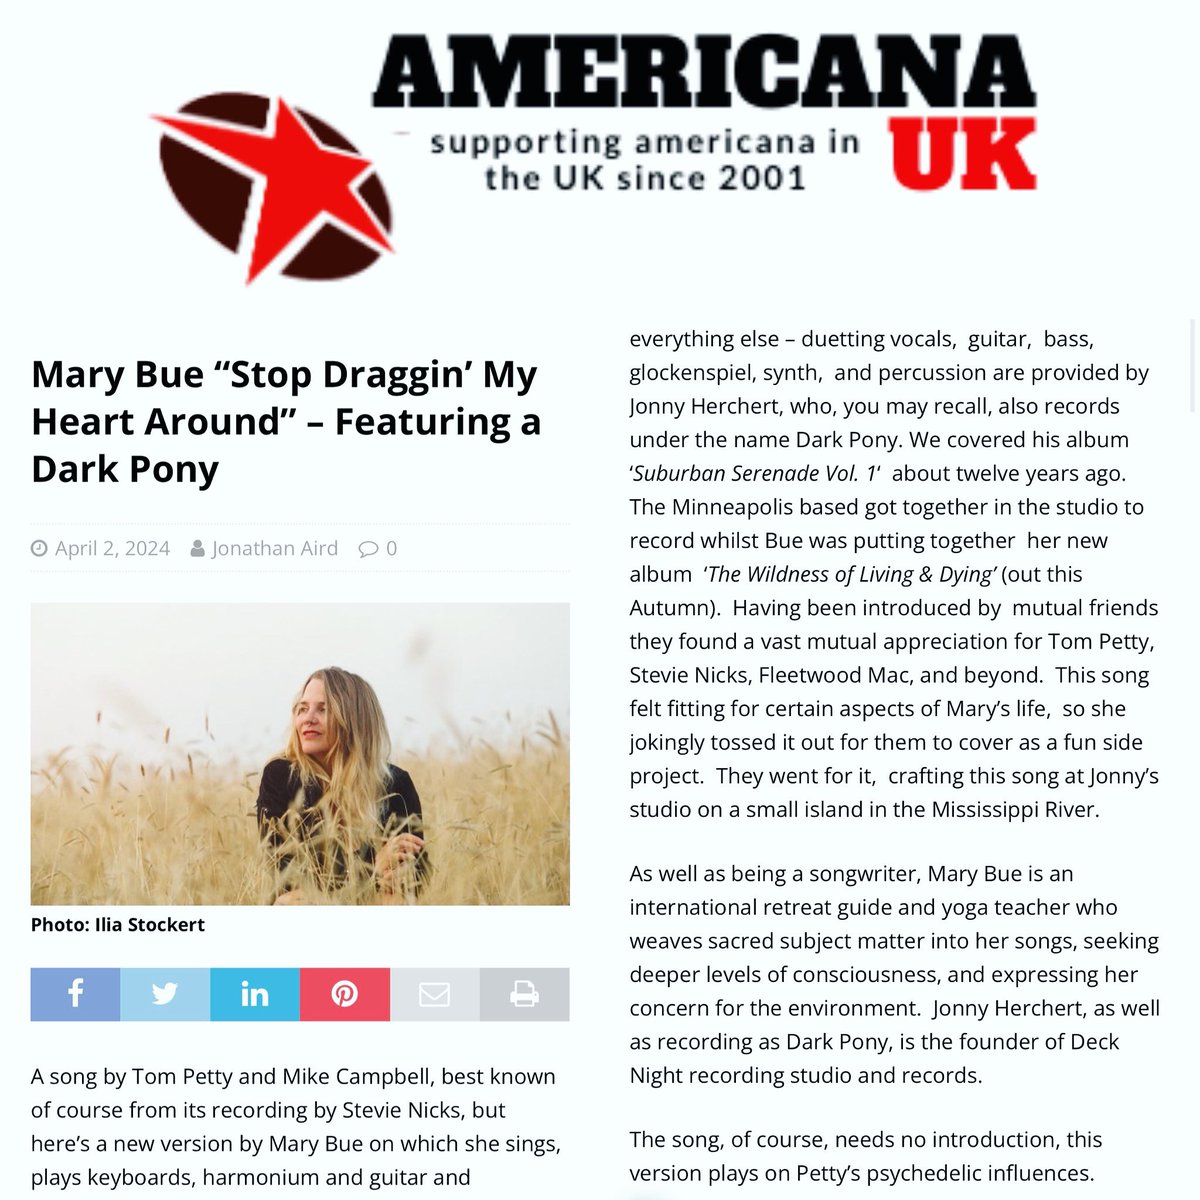 TRACK FEATURE 🎸 @americanaUK features @marybuemusic & @darkponymusic’s vibey new take on this classic which “plays on Petty’s psychedelic influences.” Check it out! 🎧 Listen: americana-uk.com/mary-bue-stop-…